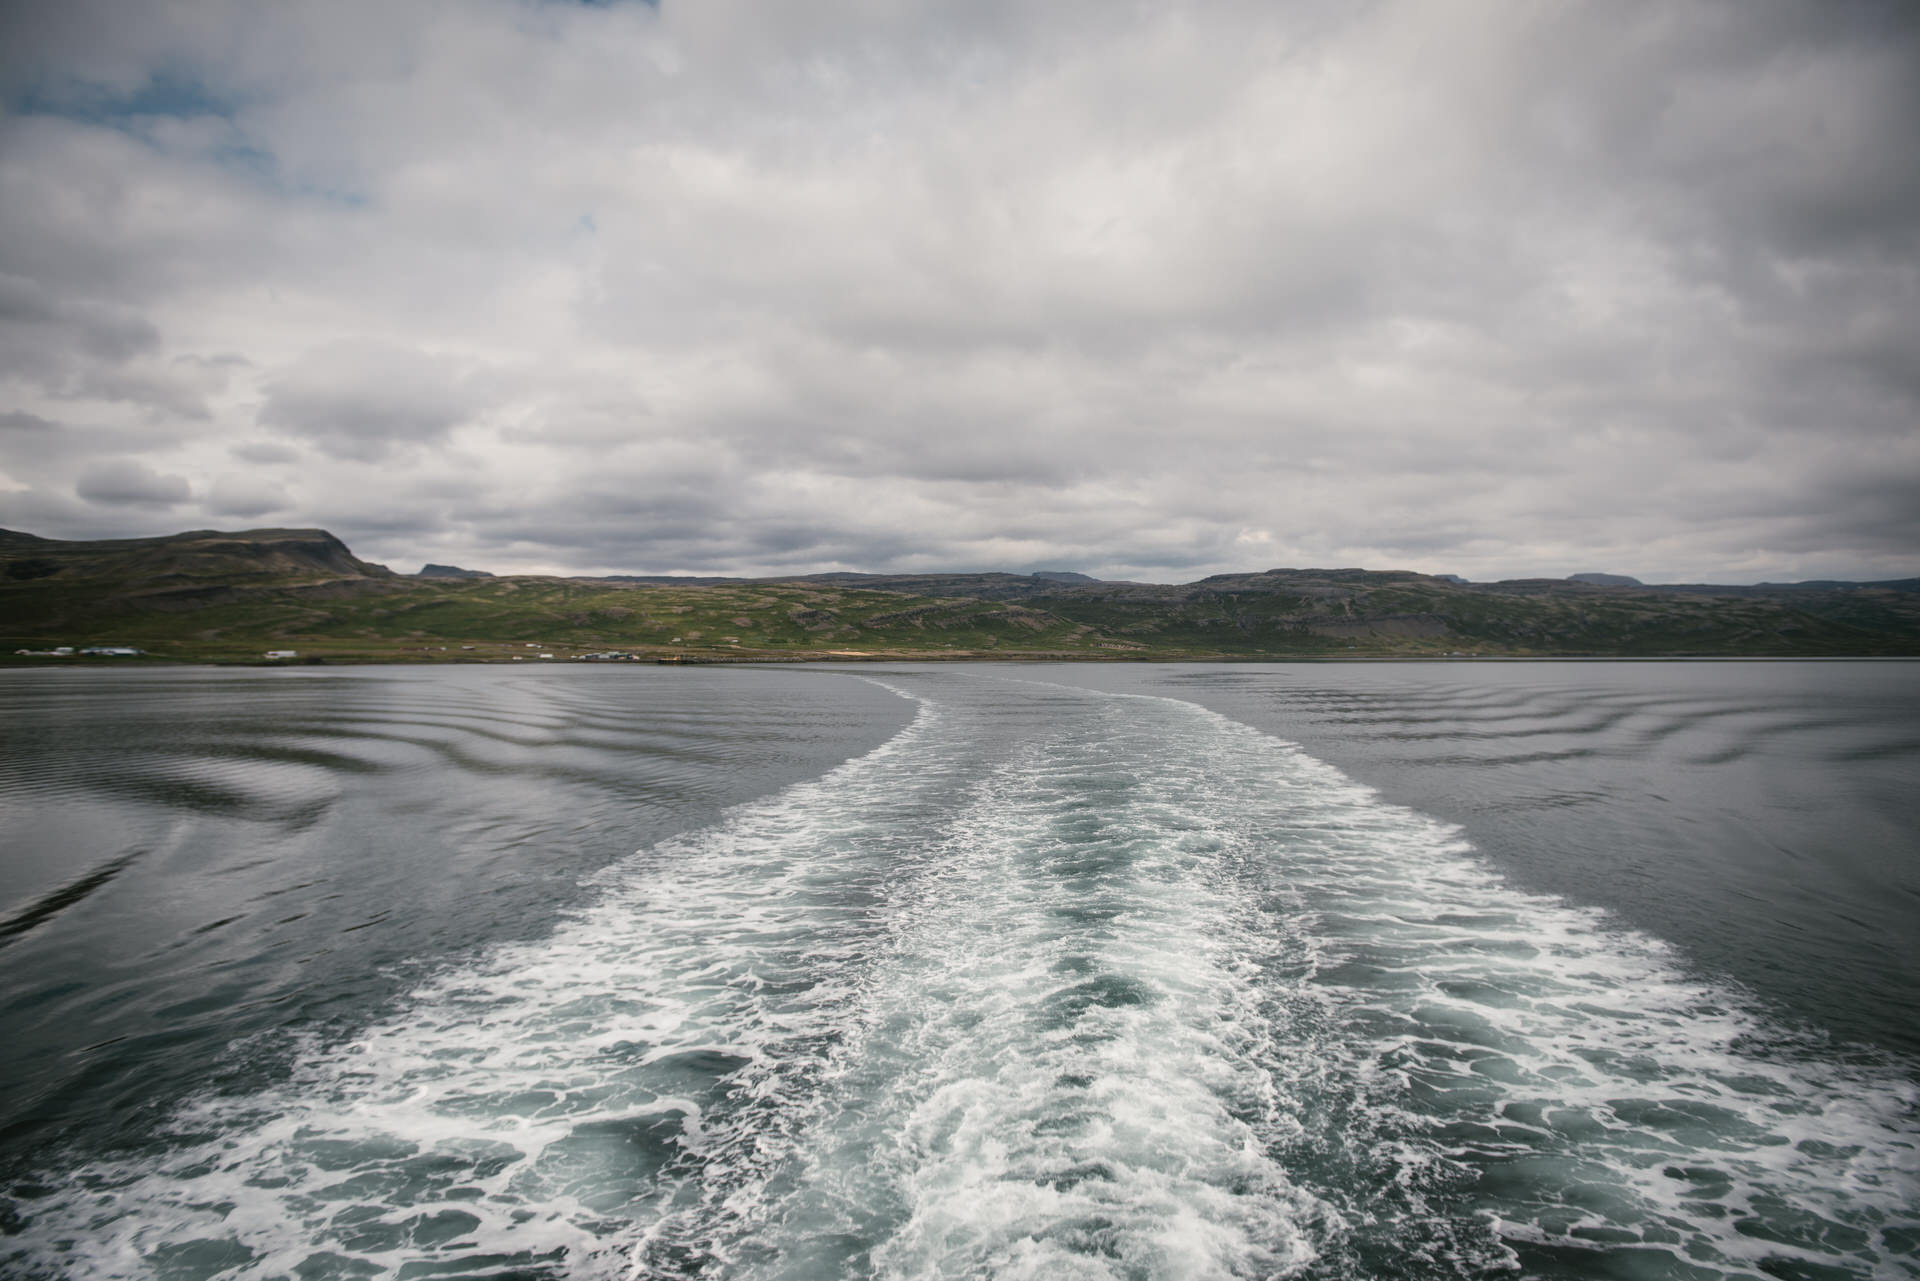 Amidst the ferry's gentle sway, their love sails from the rugged Westfjords to the awaiting embrace of Snaefelseness, a journey woven in time.